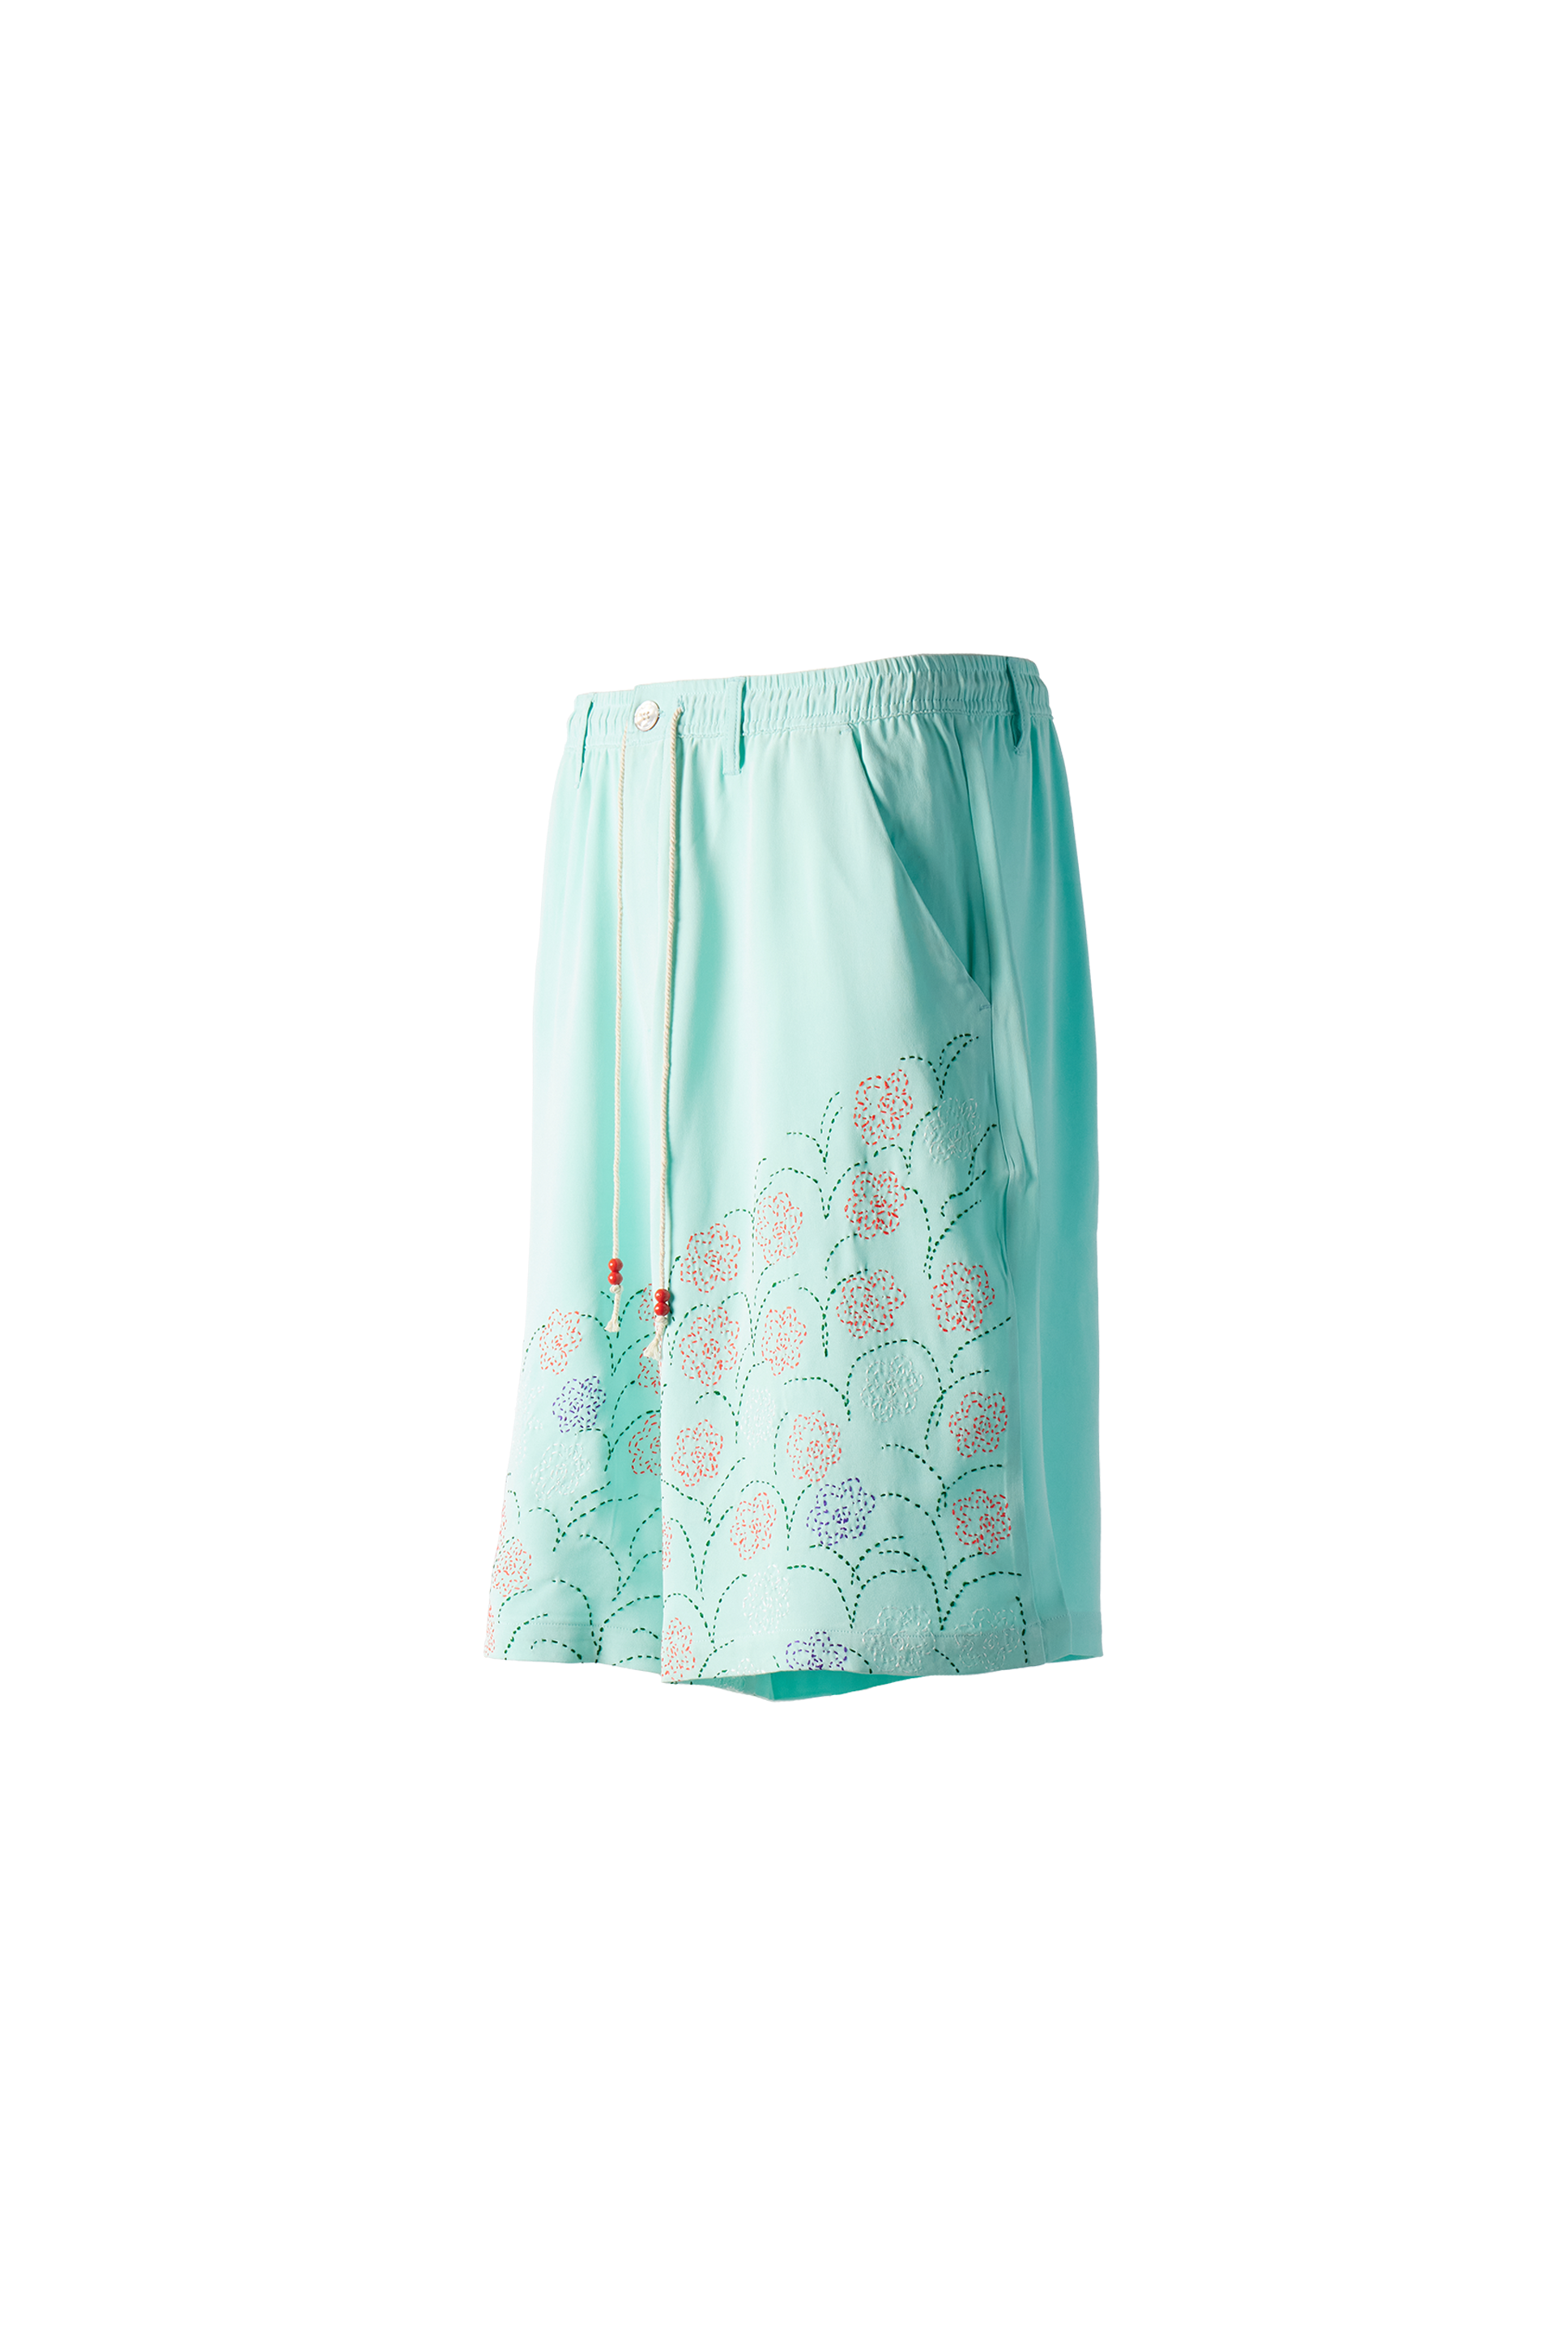 GLASS CYPRESS - Floral Silk Shorts product image